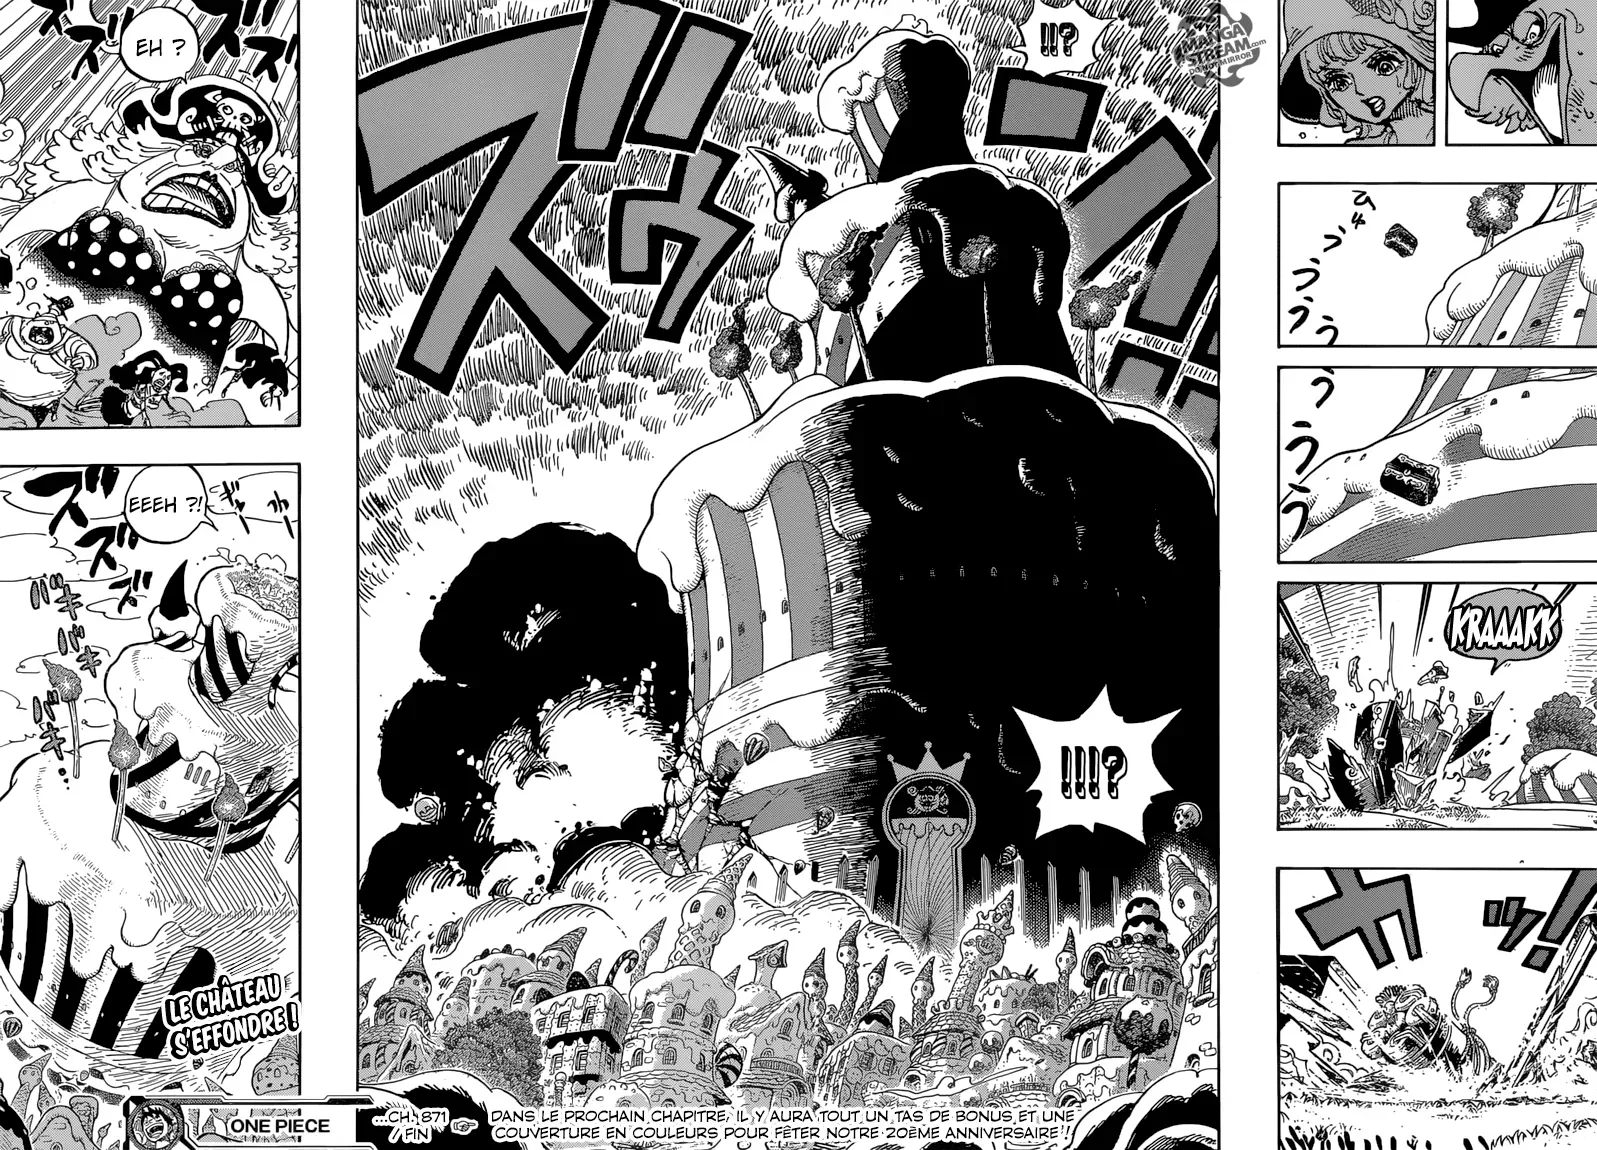 One Piece: Chapter chapitre-871 - Page 16